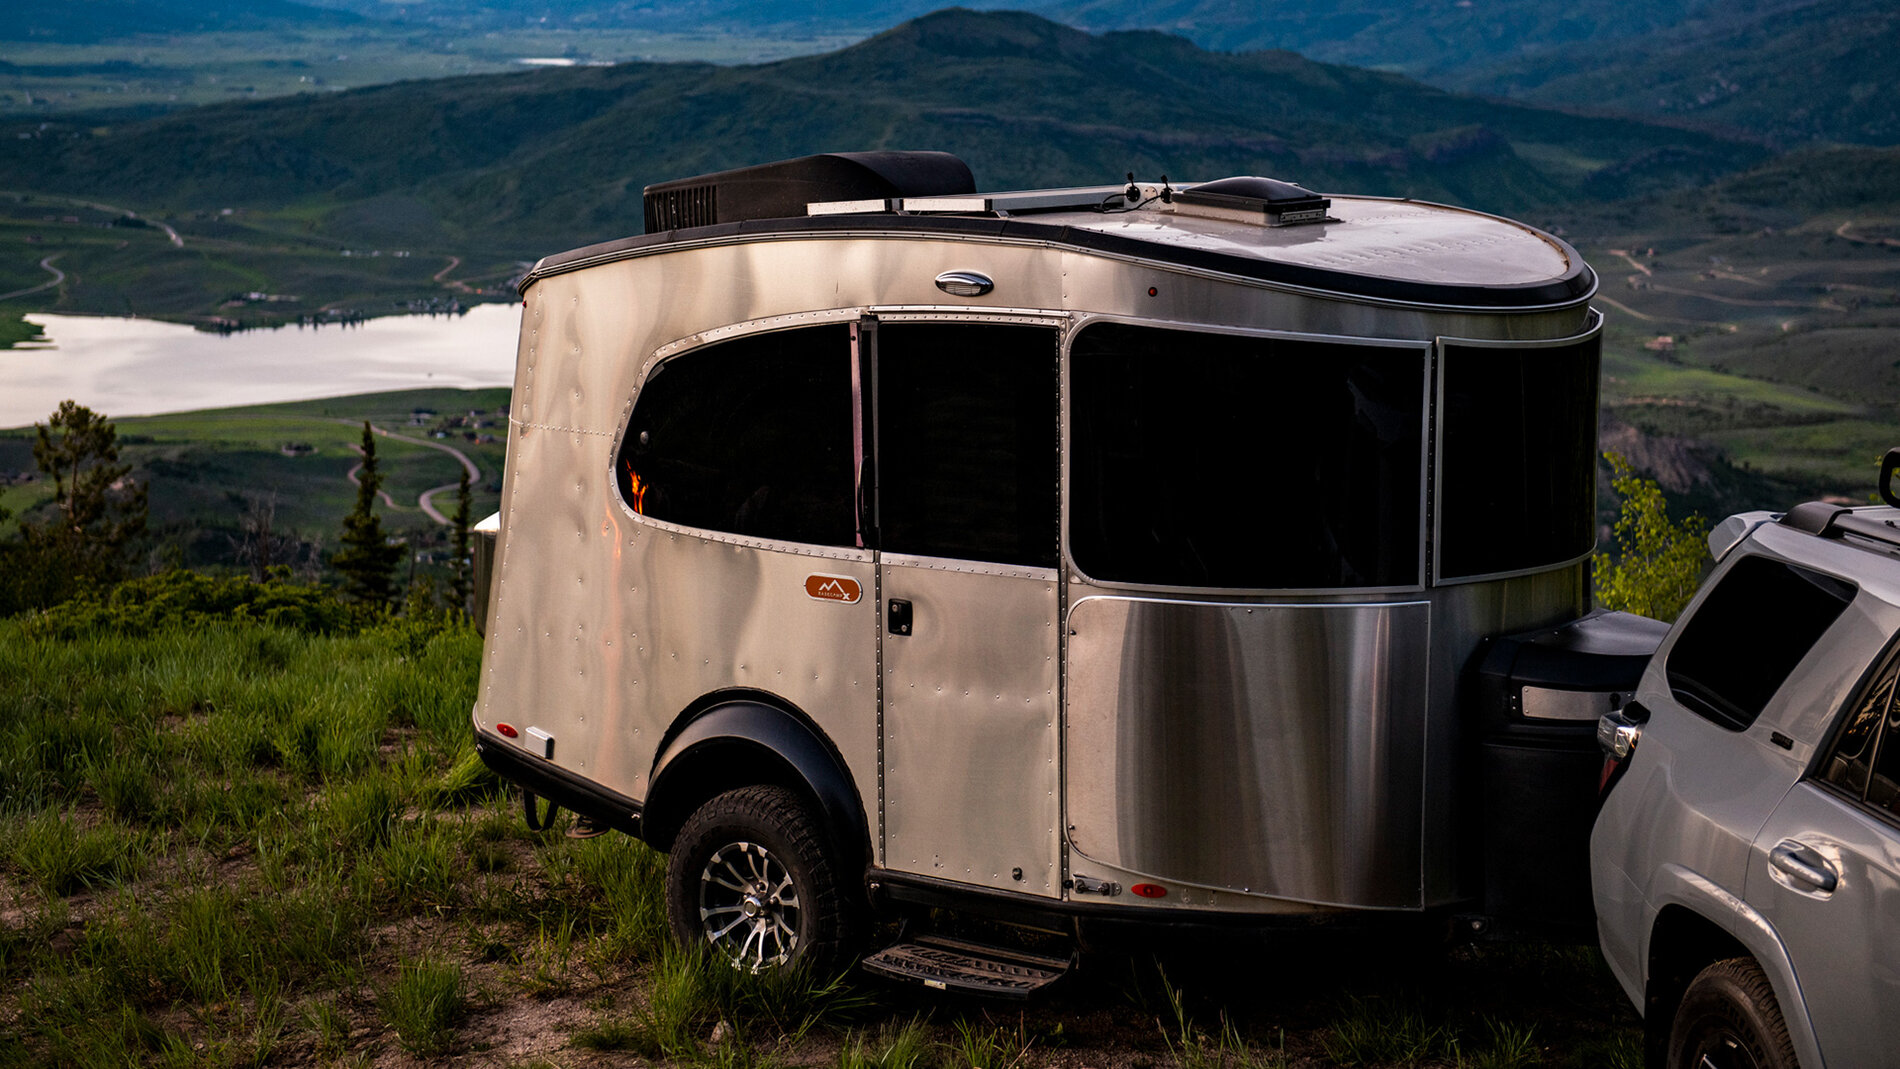 Airstream-Basecamp-16X-on-Mountaintop-Overview-Lifestyle.jpg